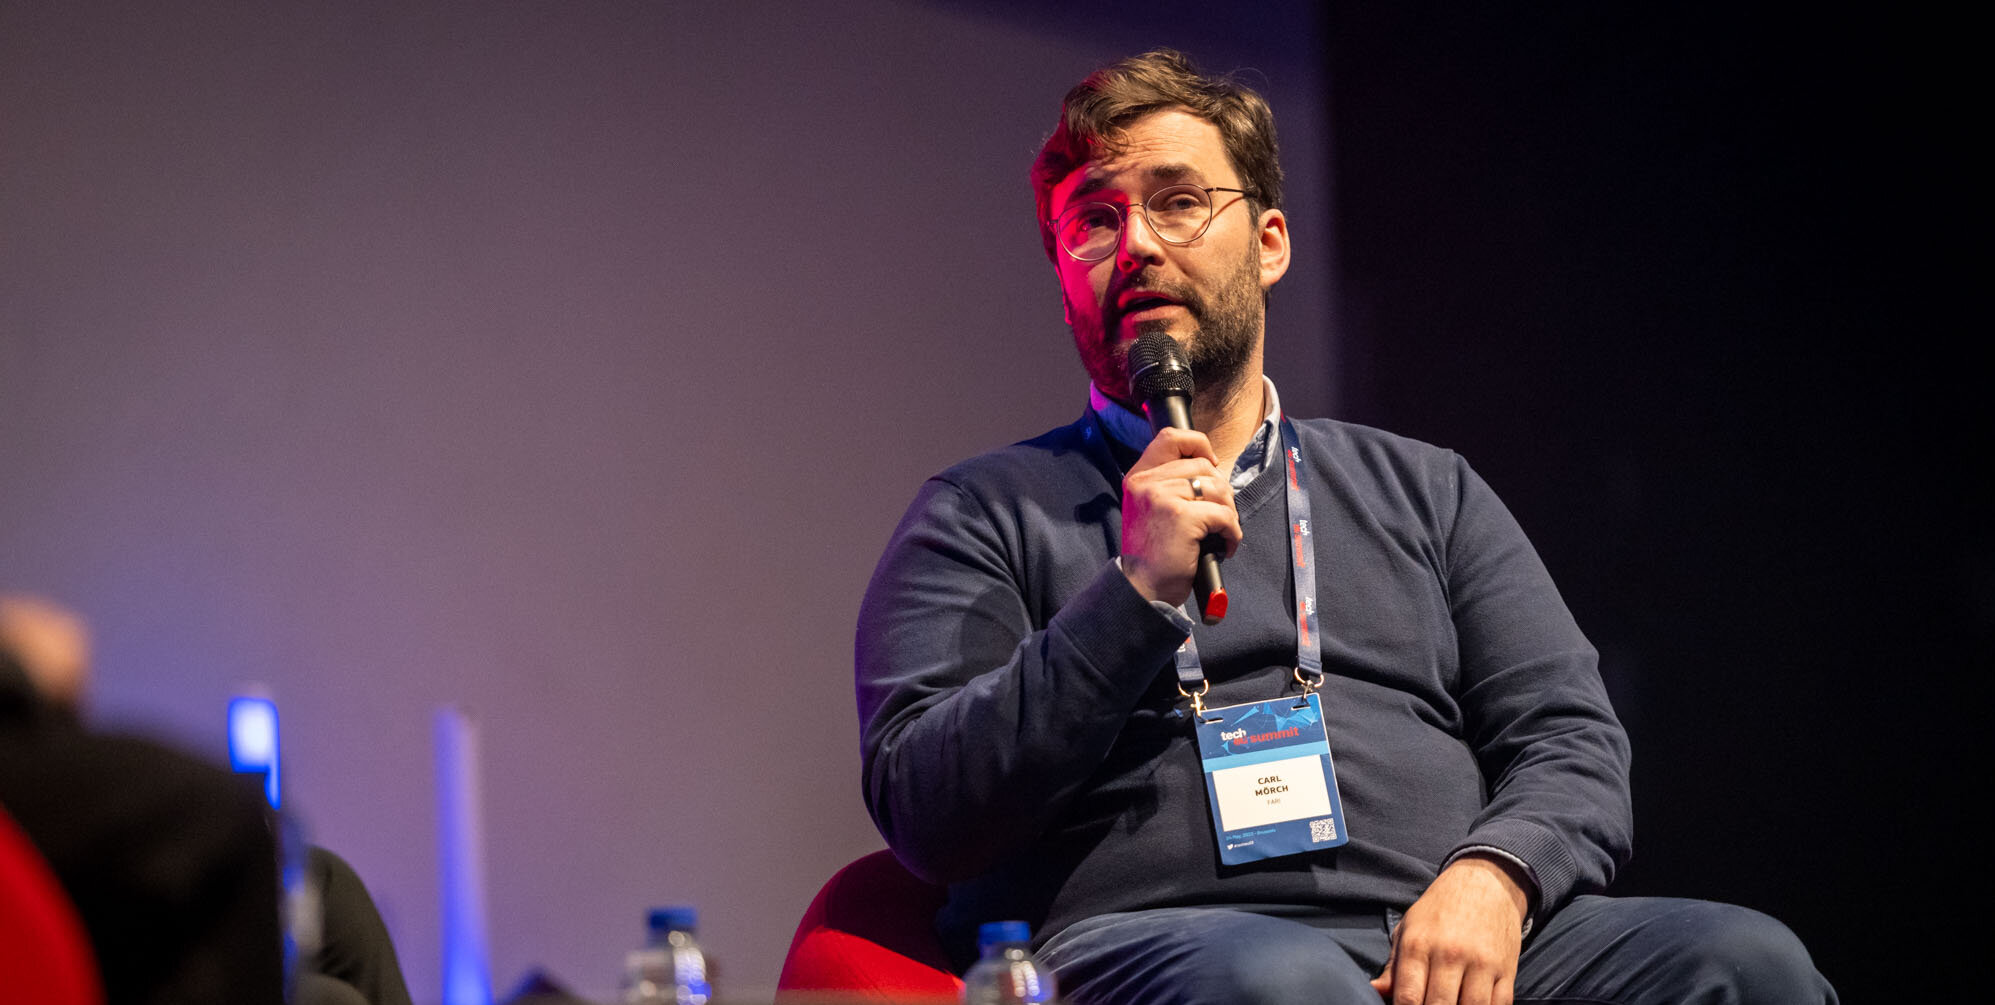 FARI co-director Carl Morch during the panel on "Charting a way forward for Ethical AI: Balancing innovation and responsibility” at tech.eu summit 2023